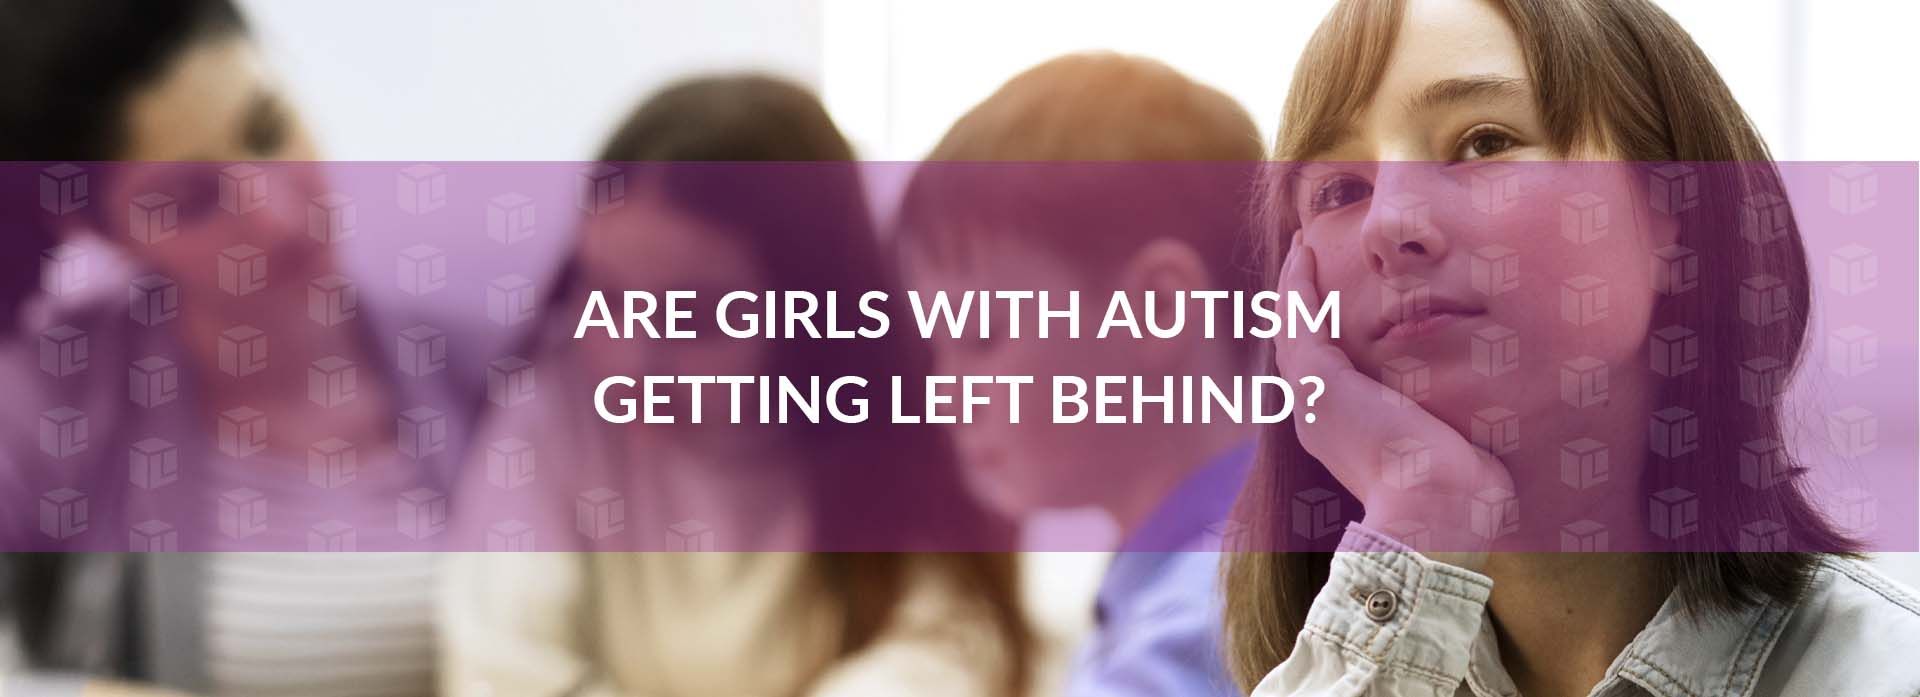 Are Girls With Autism Getting Left Behind?